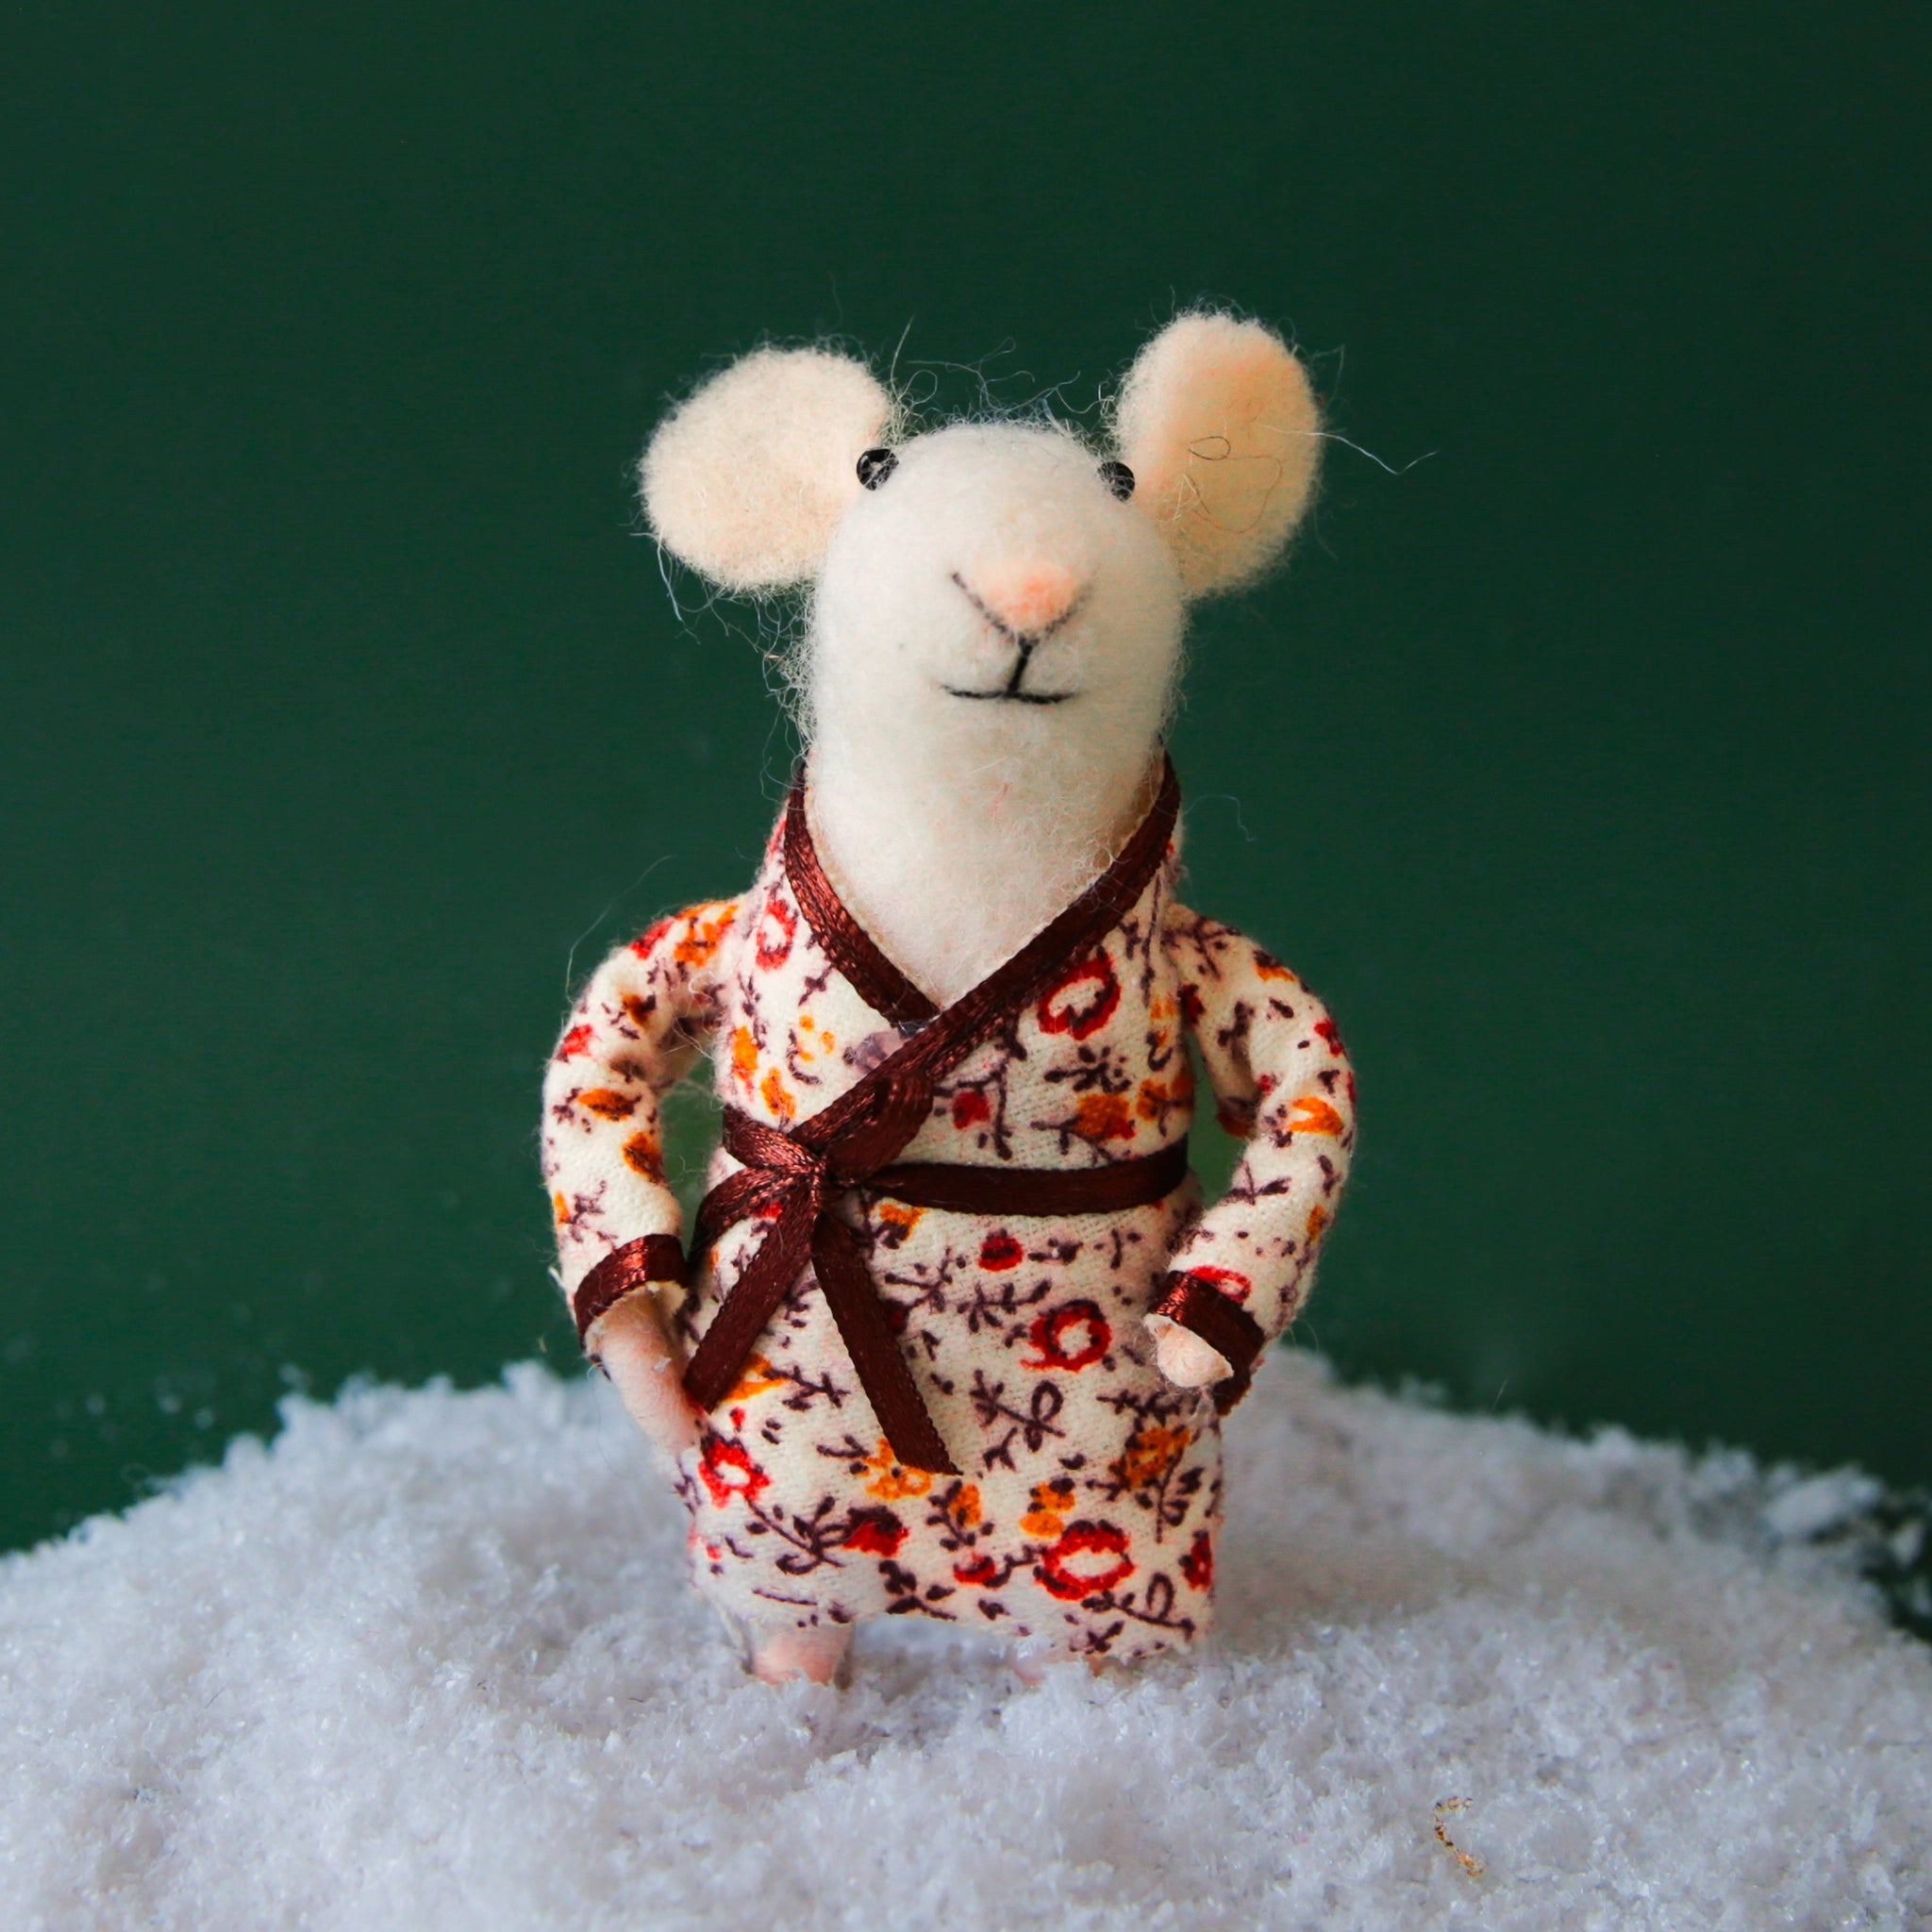 On a dark green background is a white felt mouse ornament with a floral pyjama robe on.